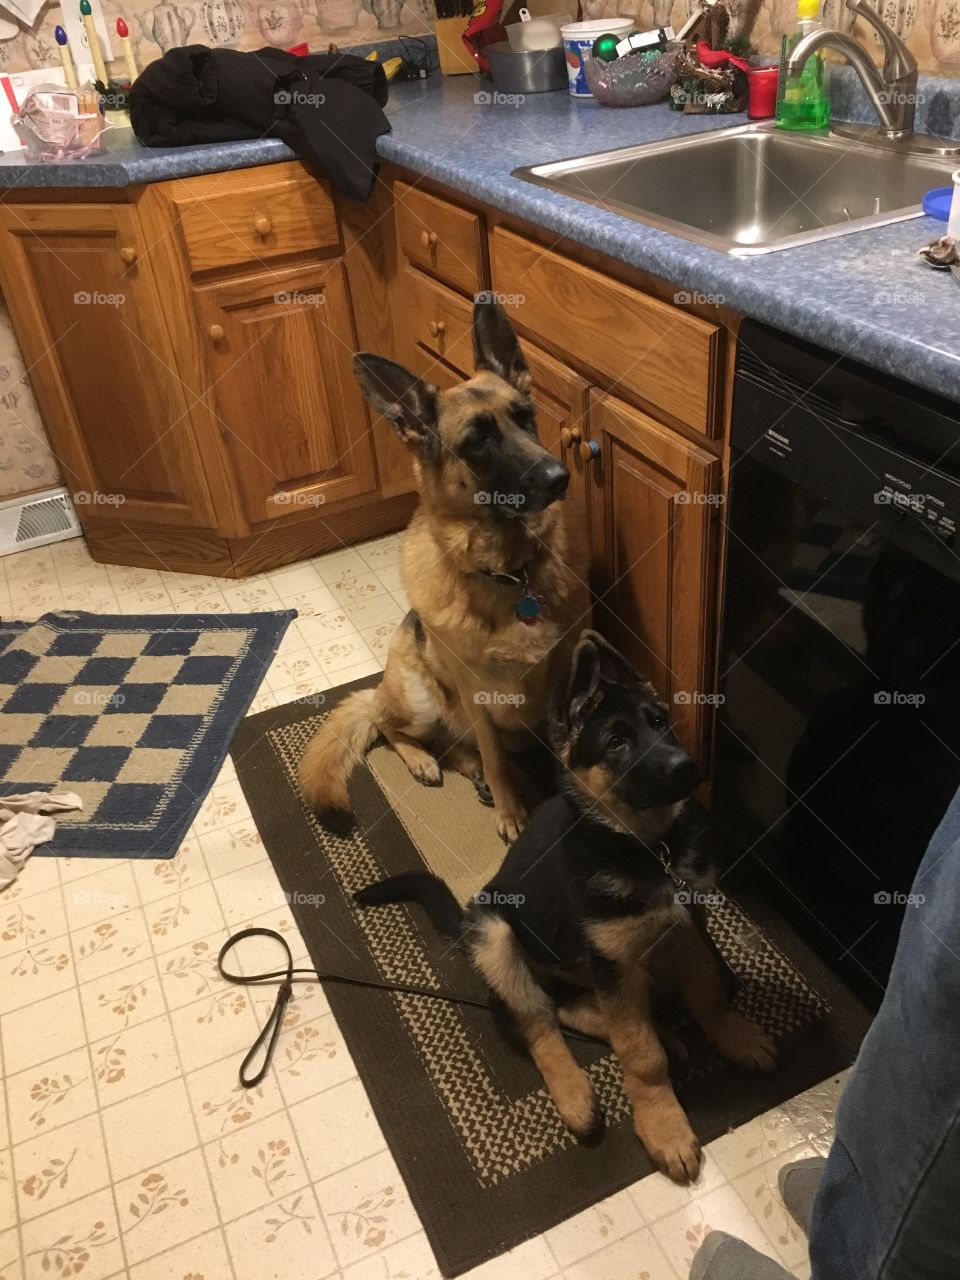 Can we have some please. 